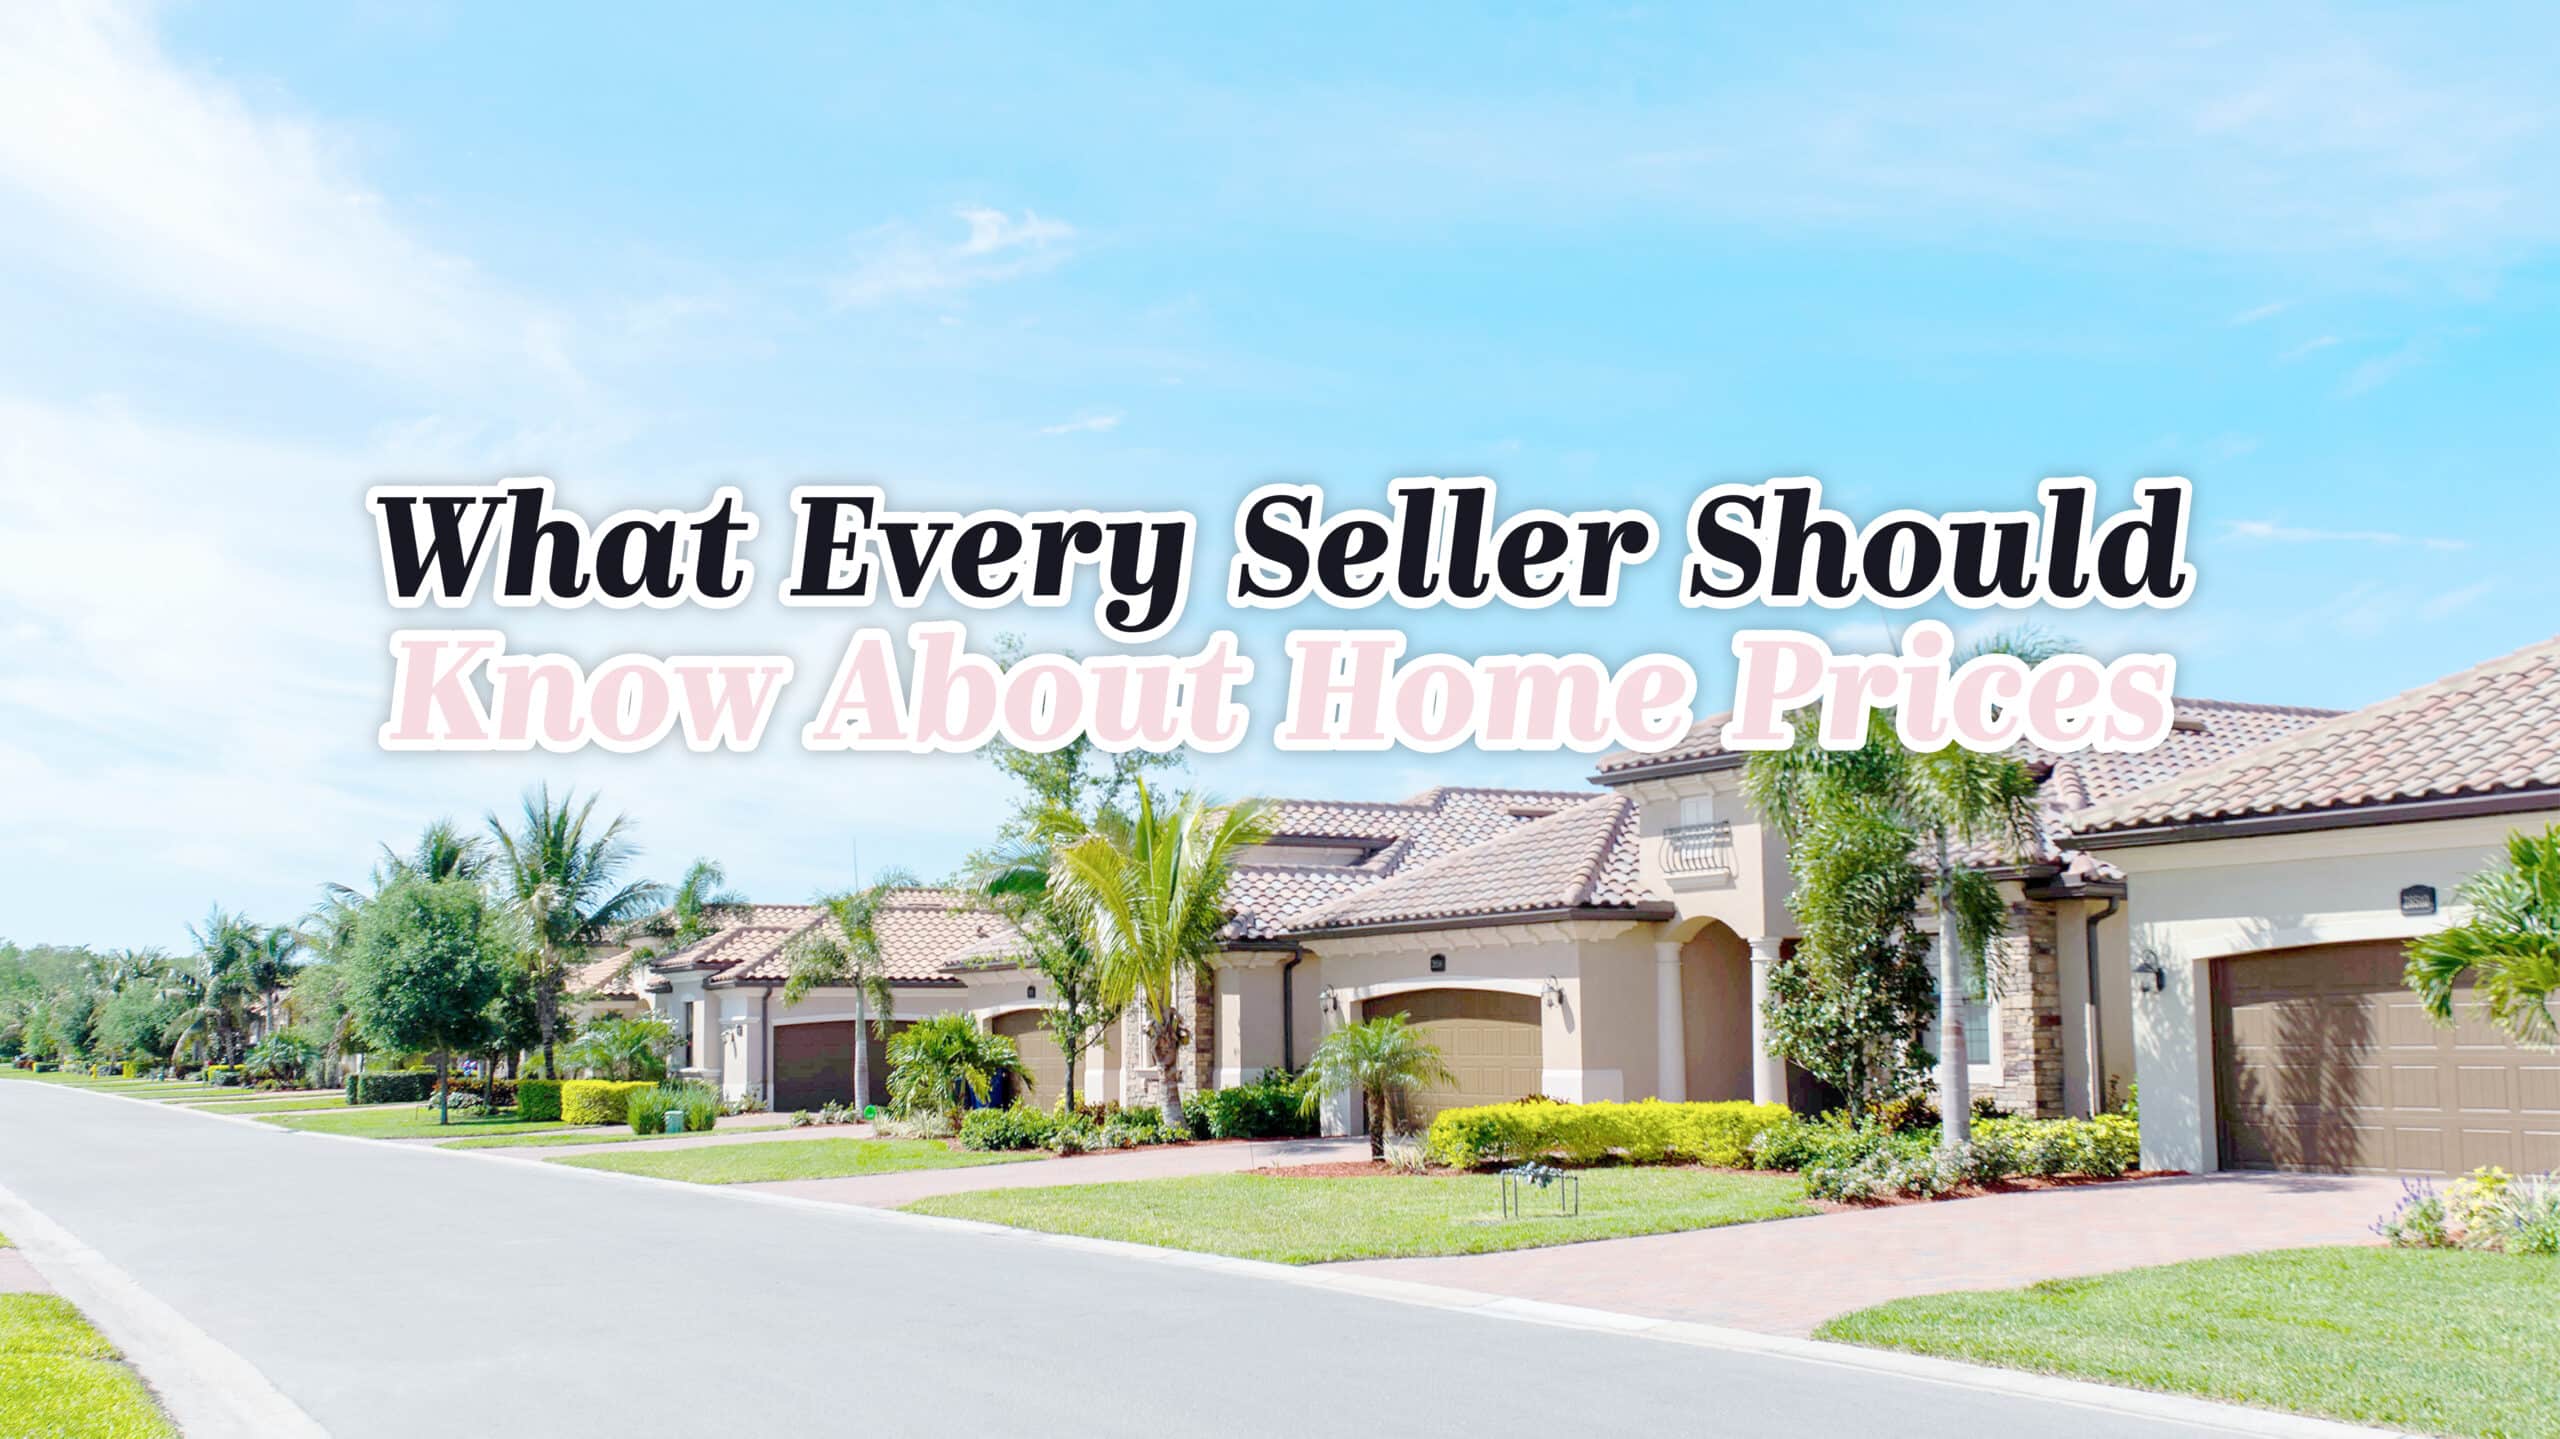 what every seller should know-glendahomes